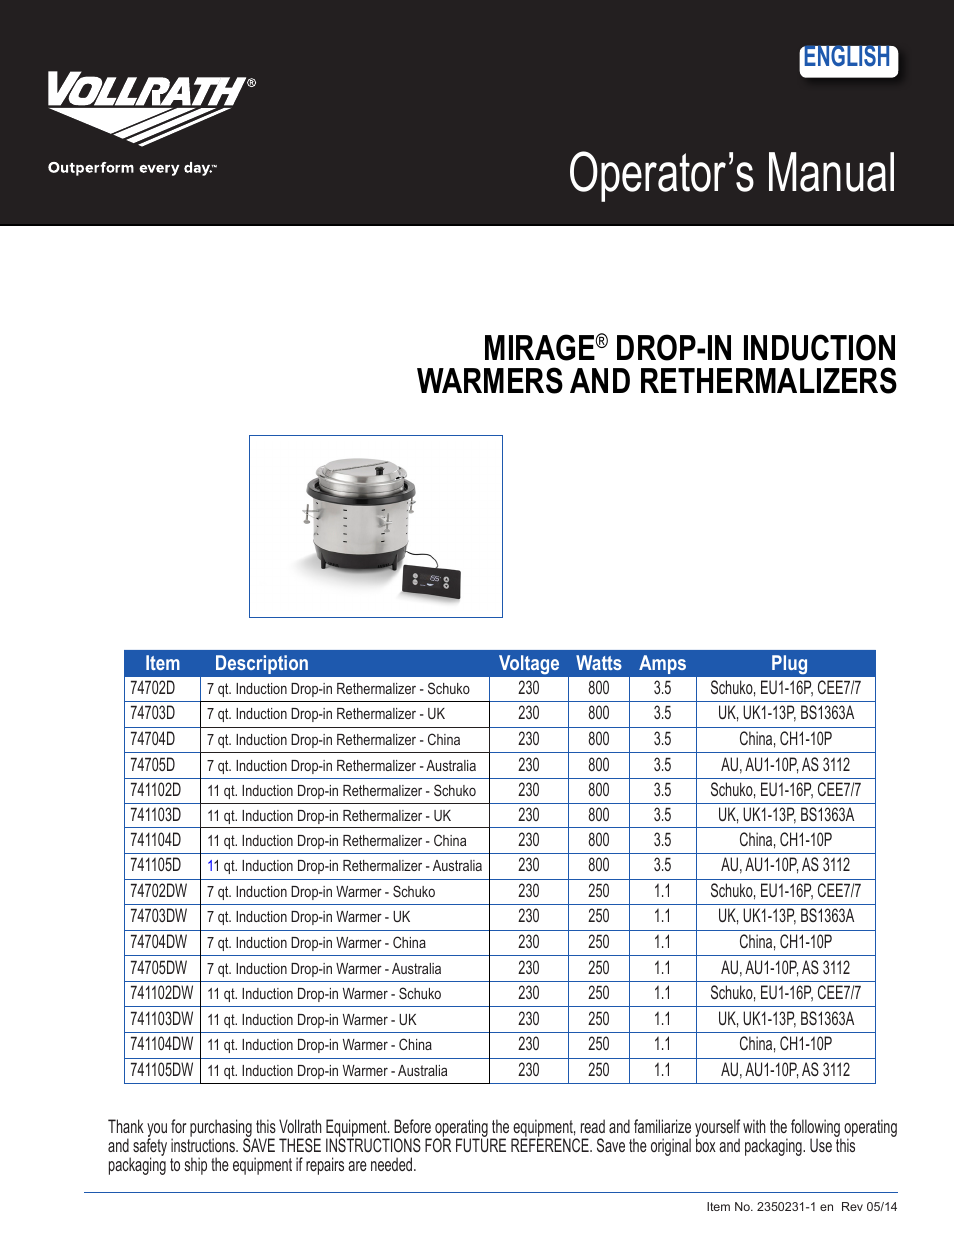 Mirage Drop-In Induction Warmers 11 Qt